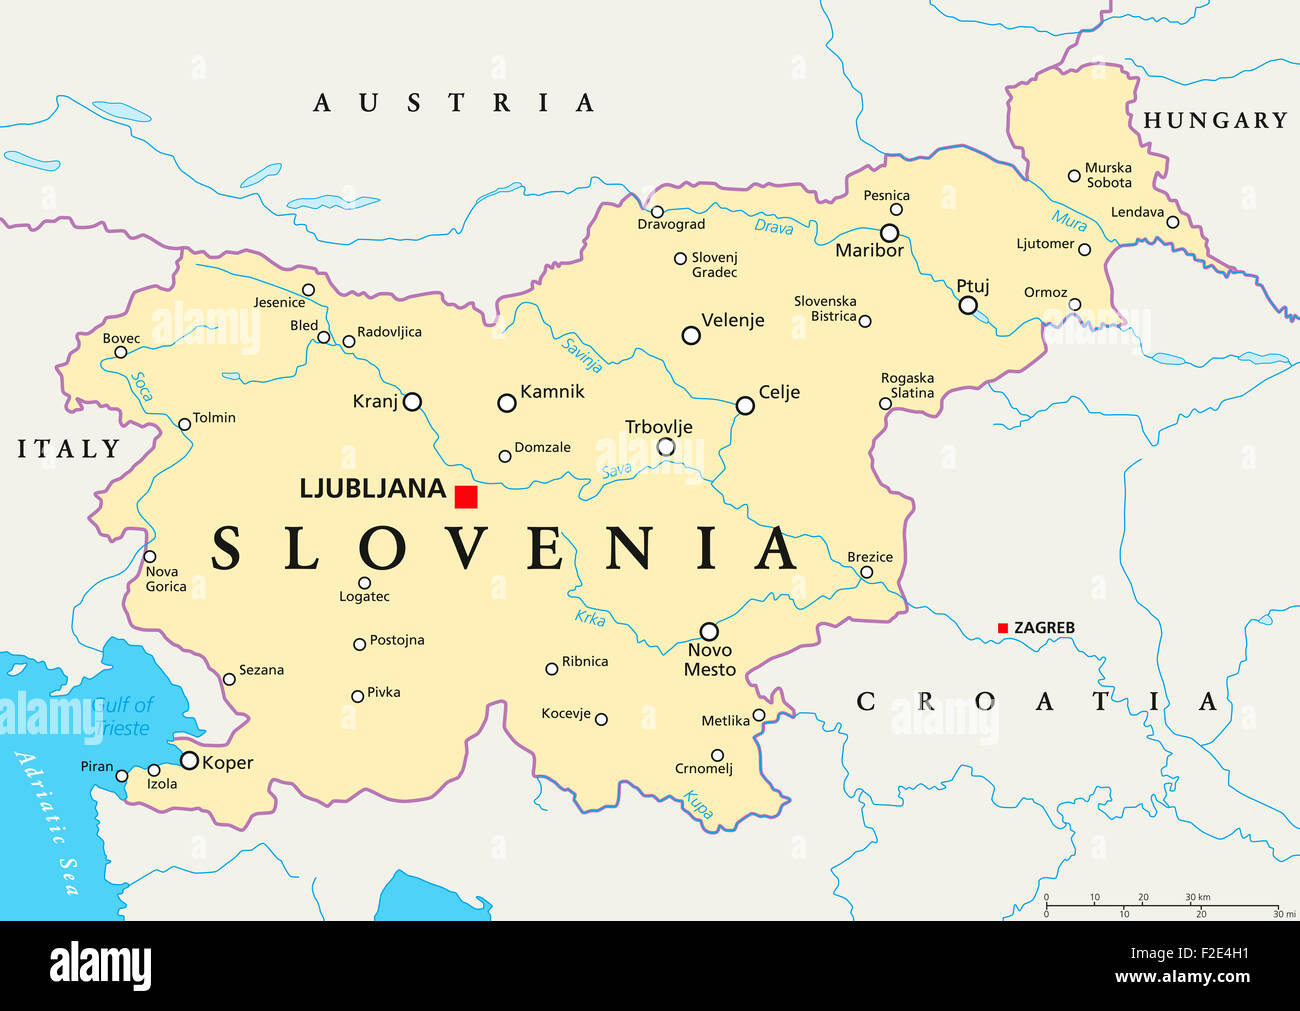 Slovenia political map with capital Ljubljana, national borders, important cities, rivers and lakes. English labeling / scaling. Stock Photo